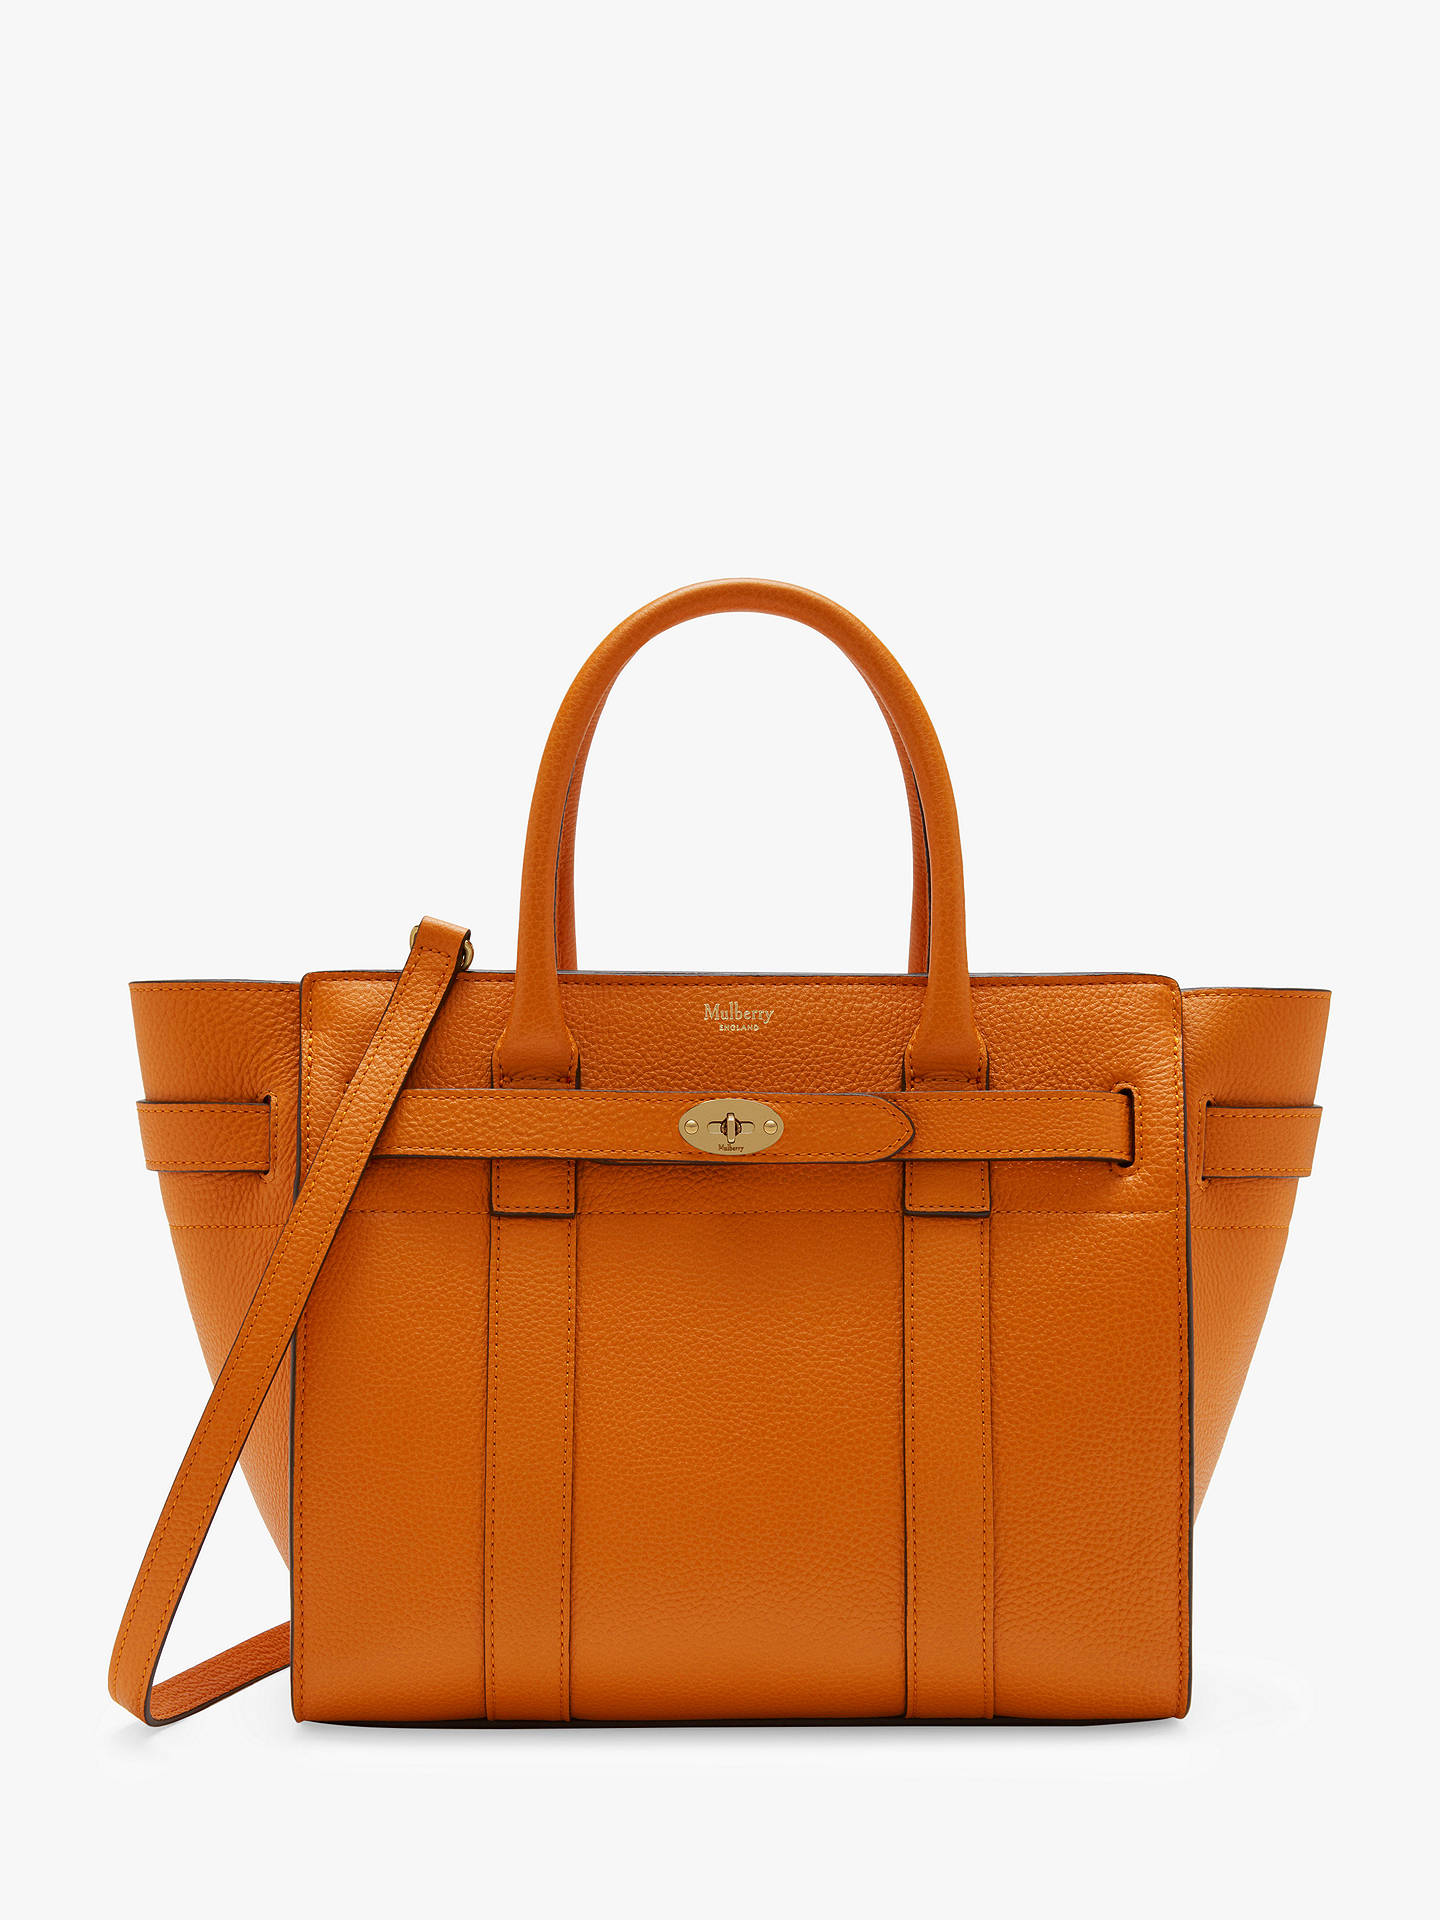 Mulberry Small Bayswater Zipped Classic Grain Leather Tote Bag at John Lewis & Partners